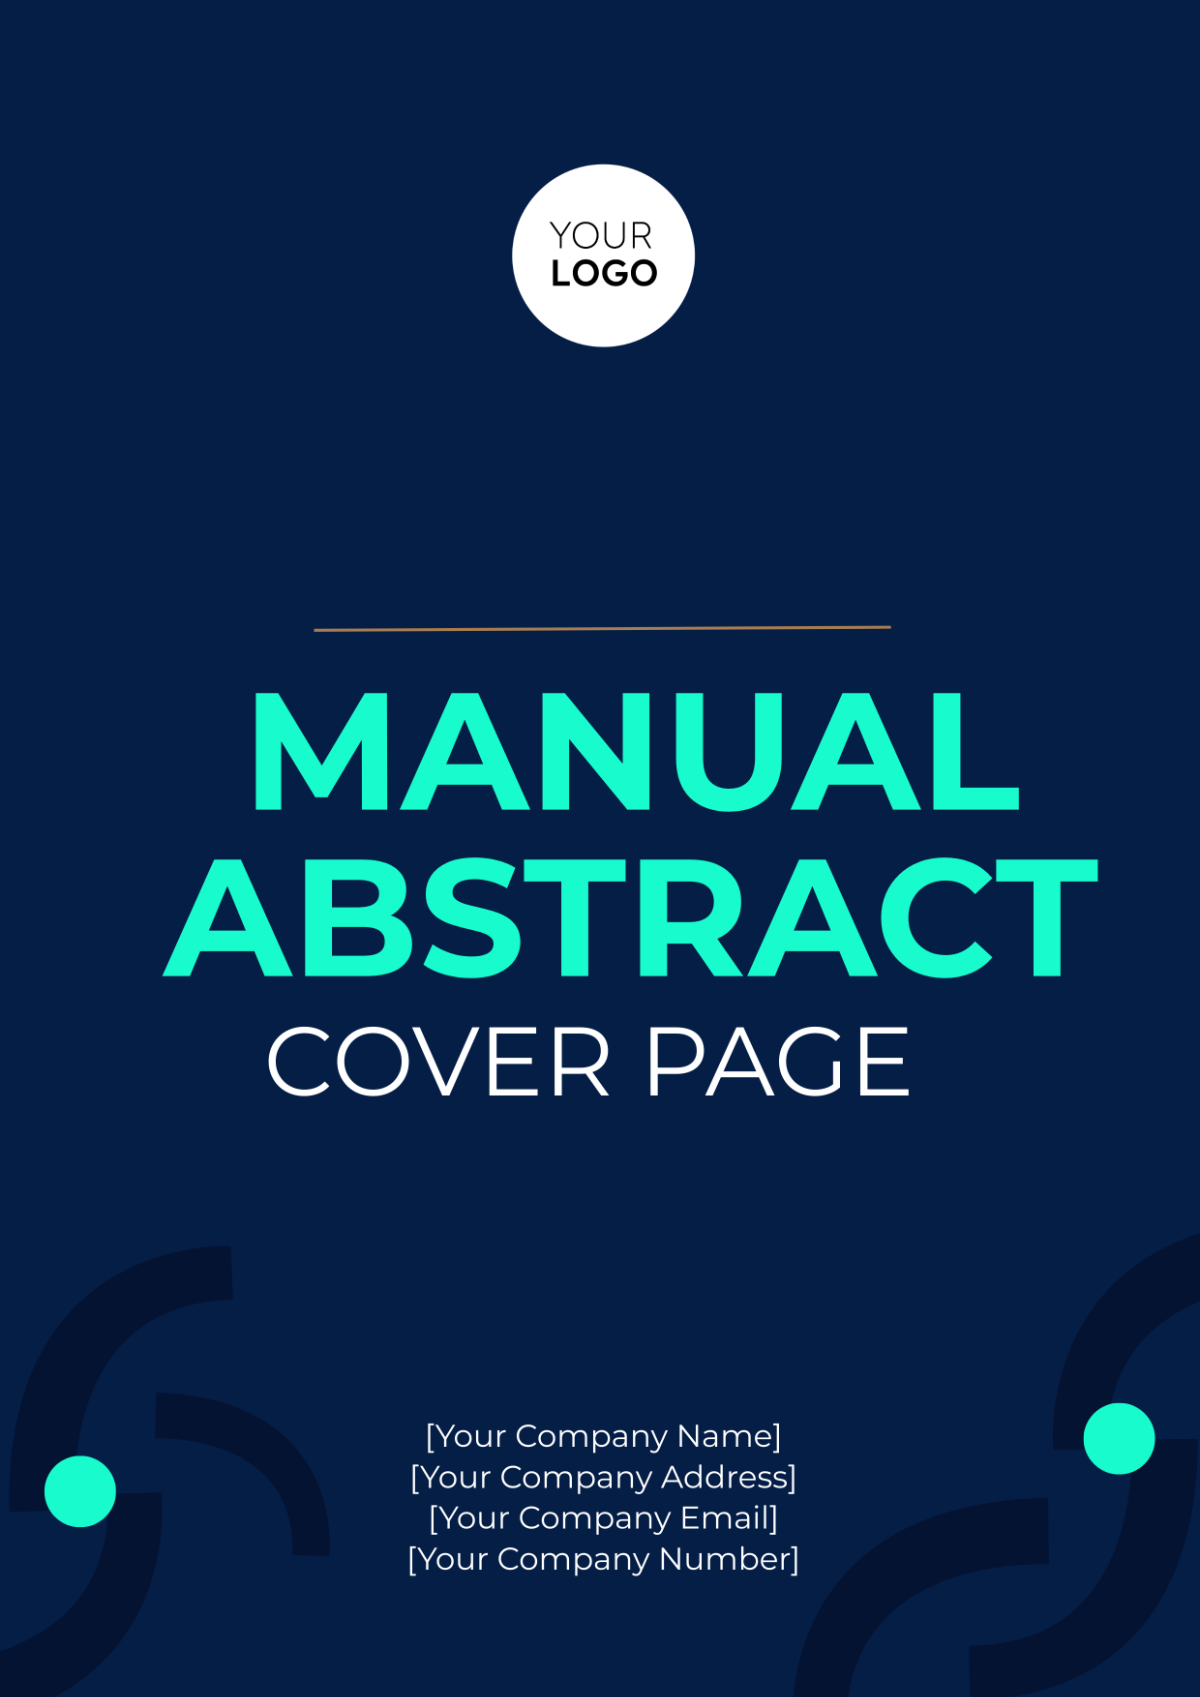 Manual Abstract Cover Page